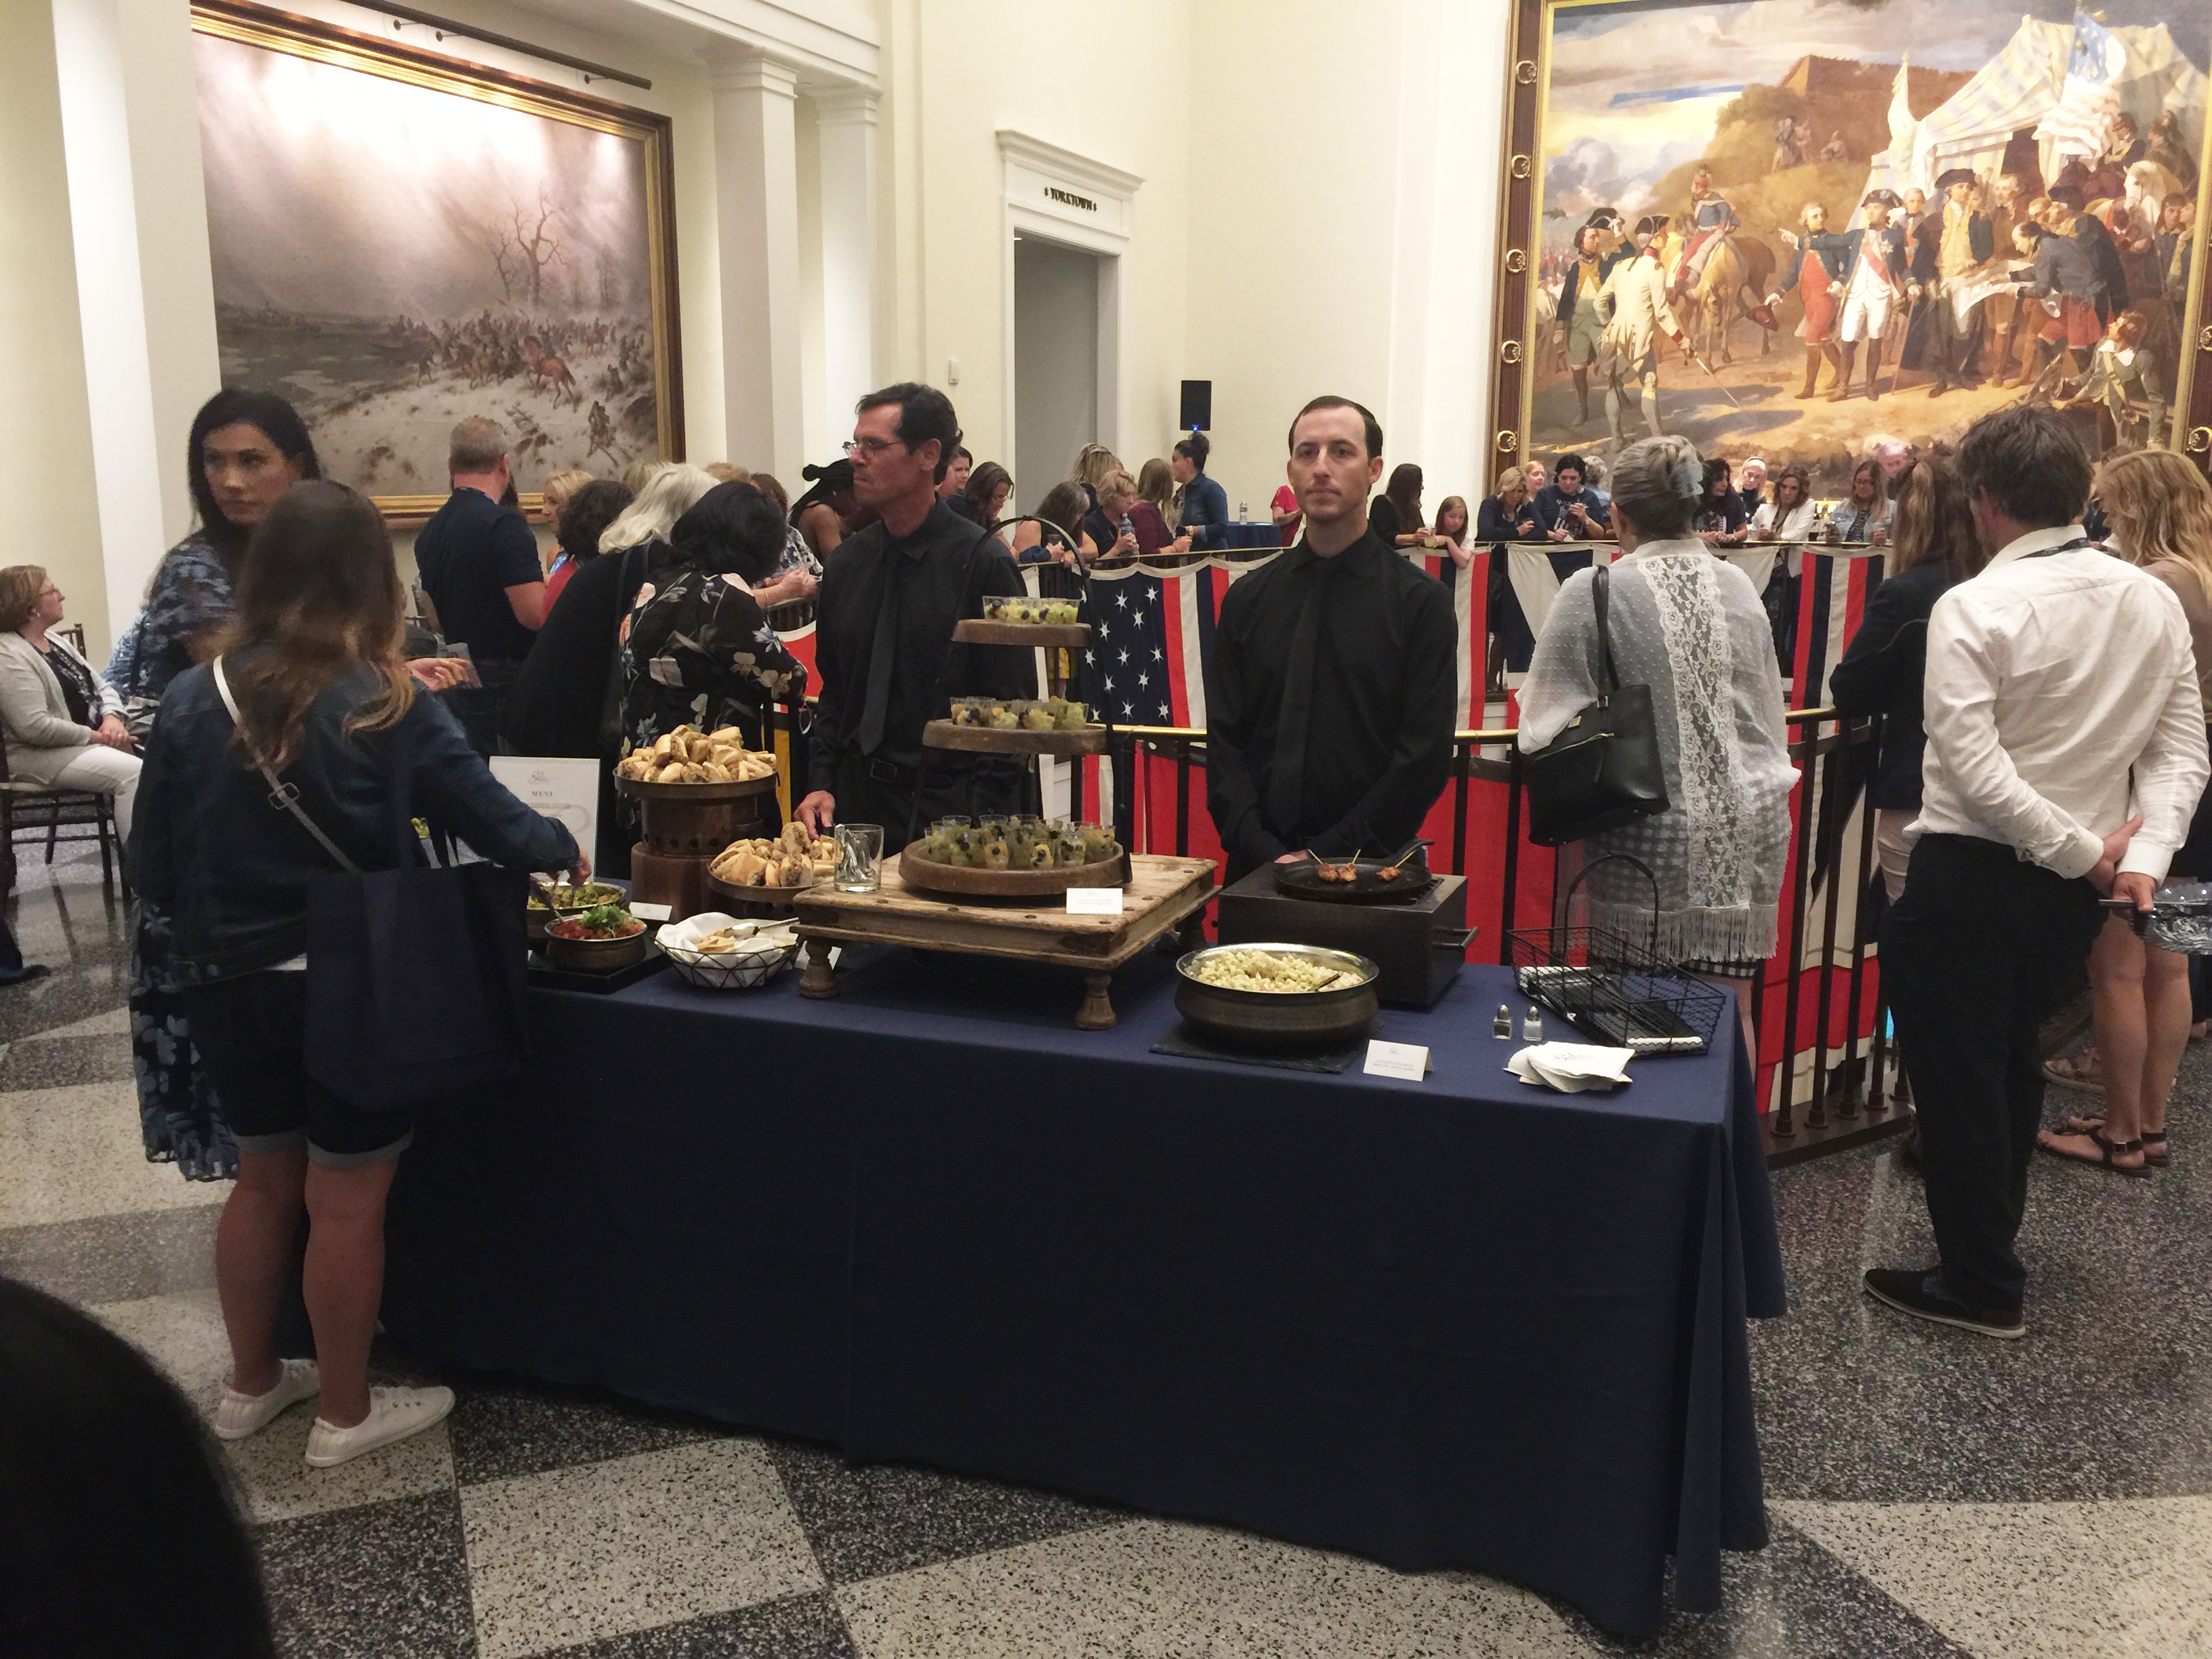 Summit opening reception at the Museum of the American Revolution